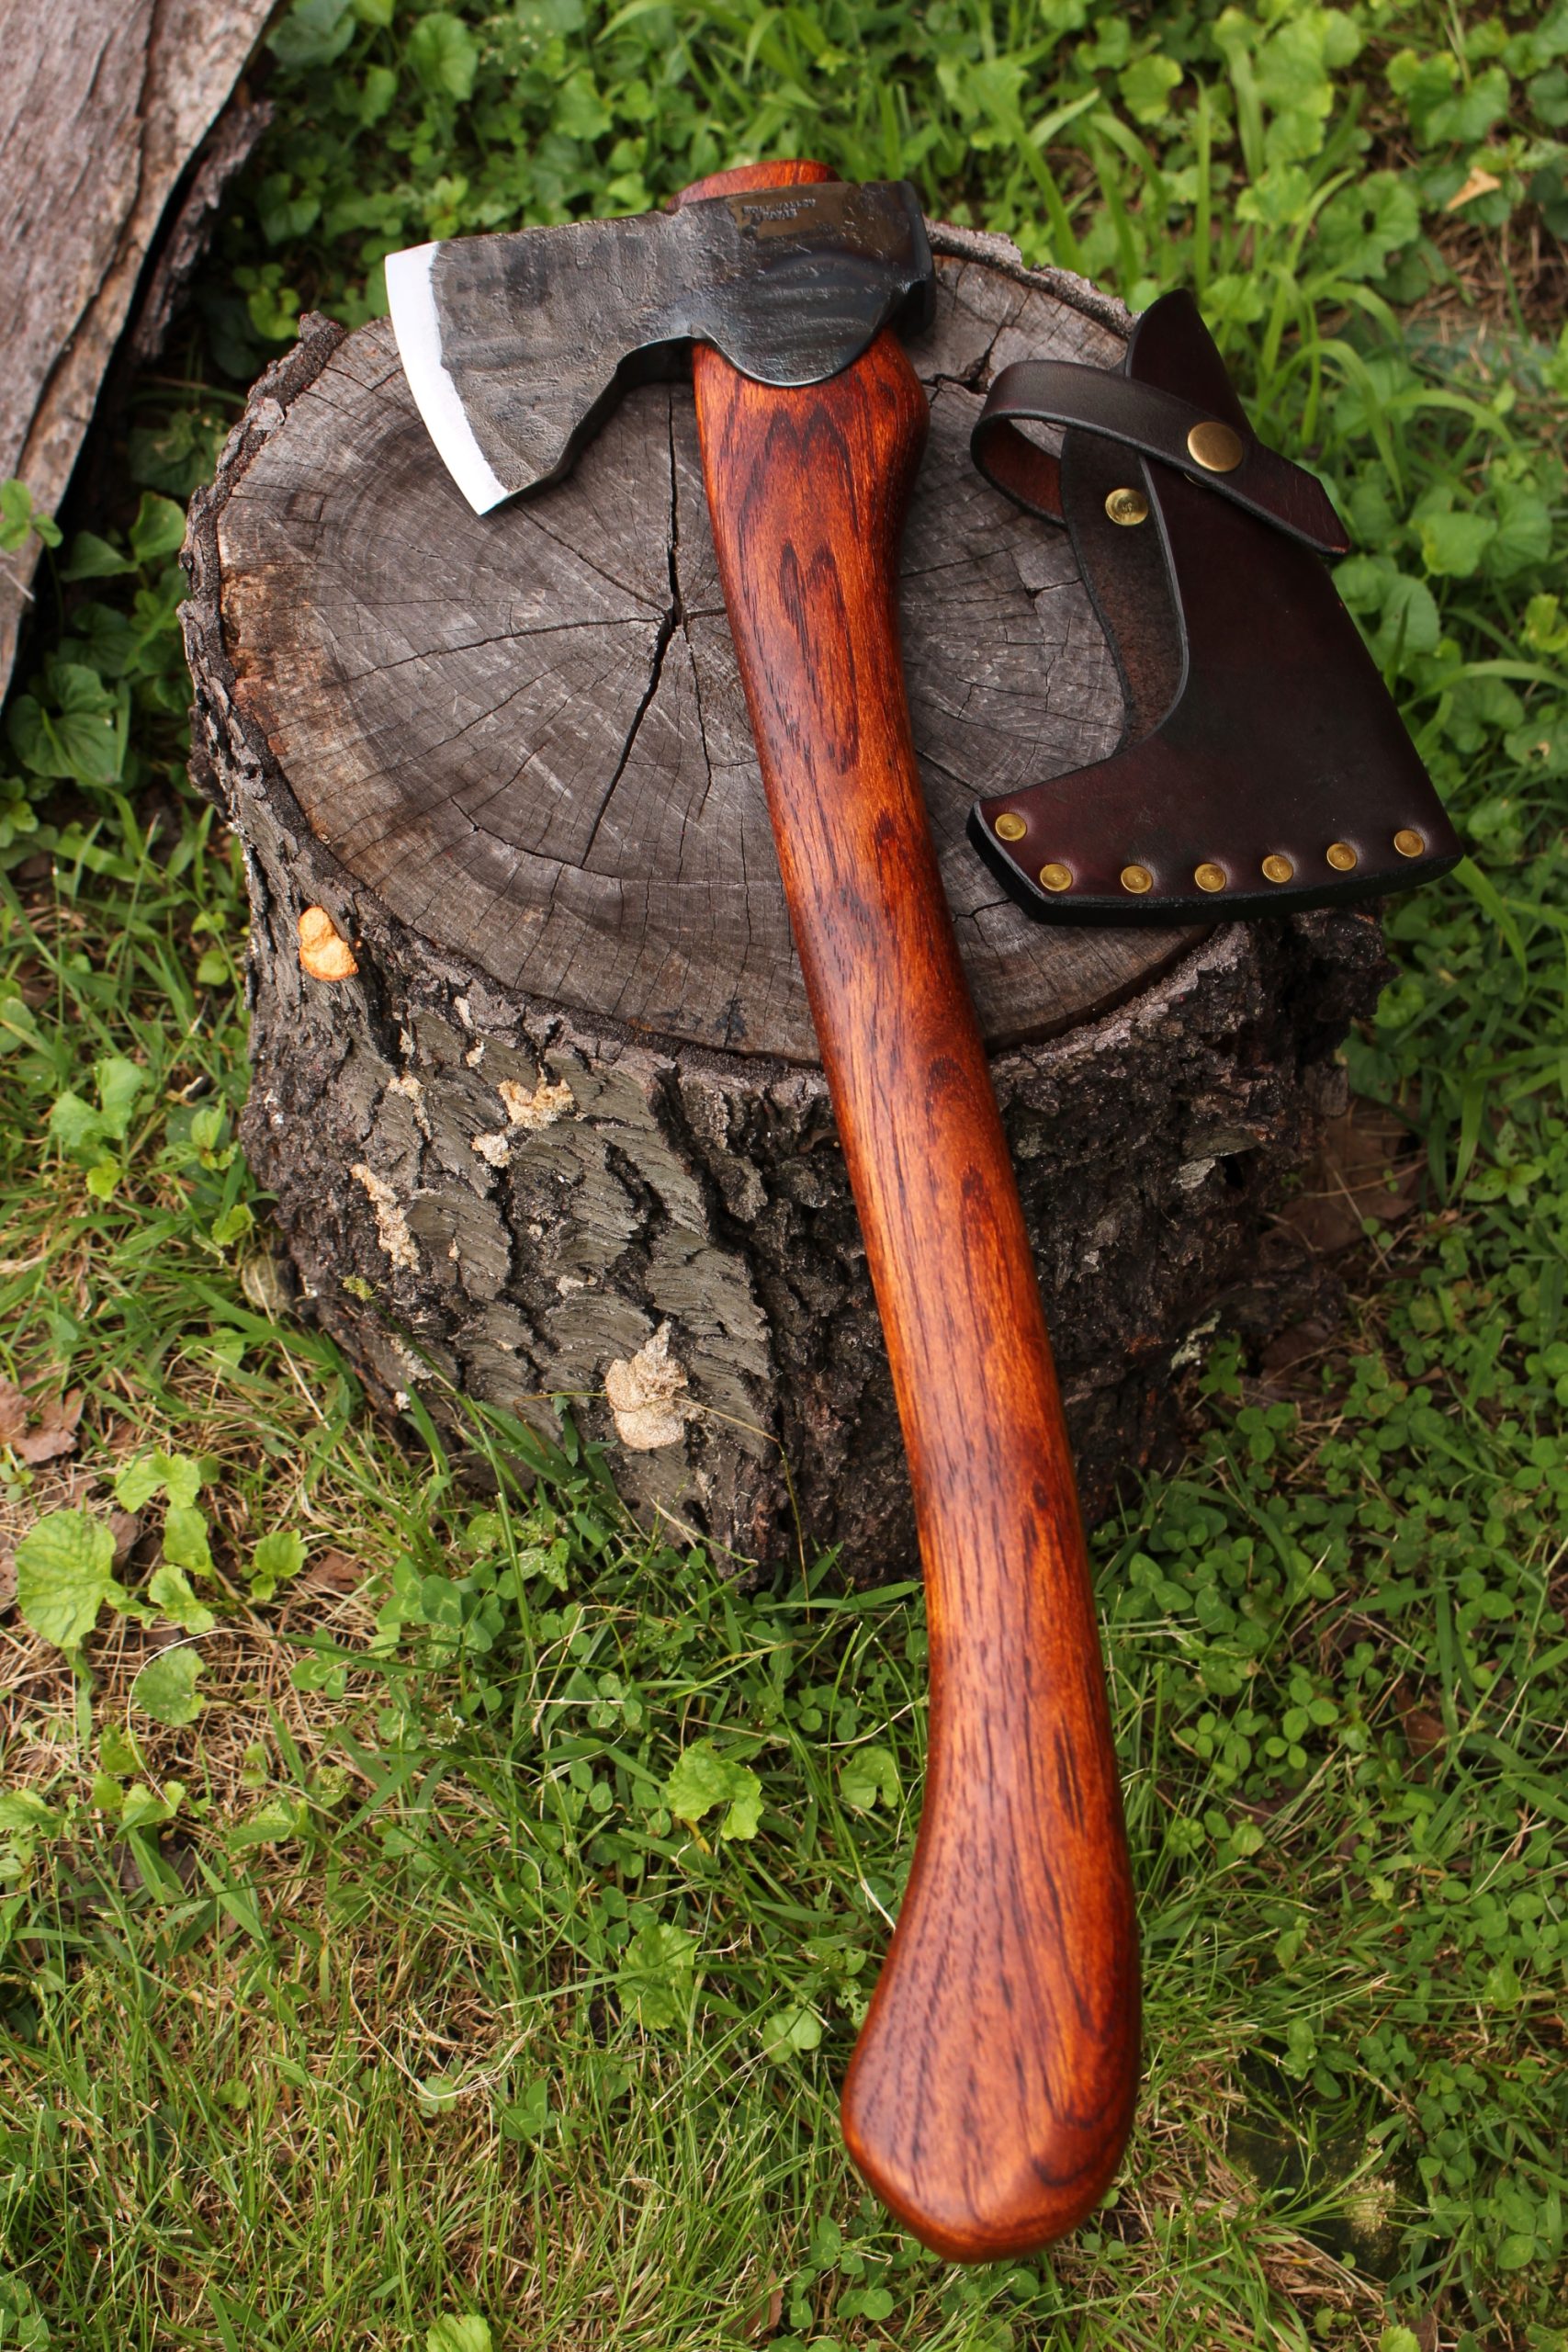 handmade, usa made, usa made axe, hatchet, chopping, wood chopping, outdoor, outdoorsman, survival, backwoodsman, hickory, axe made in america, axes made in the usa, ike bullington, wolf valley forge, valley forge, pack axe, back packing, camping, trail axe, hunting axe, trappers axe, camp axe, bush axe, belt axe, pack axe, leather shoulder rig, chopping axe, leather axe carrier, shoulder sling for axe, carpenter's axe, Wolf Valley Forge, Wolf Valley Forge axe release, Axe Wax, haversack, go back, man purse, man bag, canvas bag, reenactor, reenacting, Trekker Axe